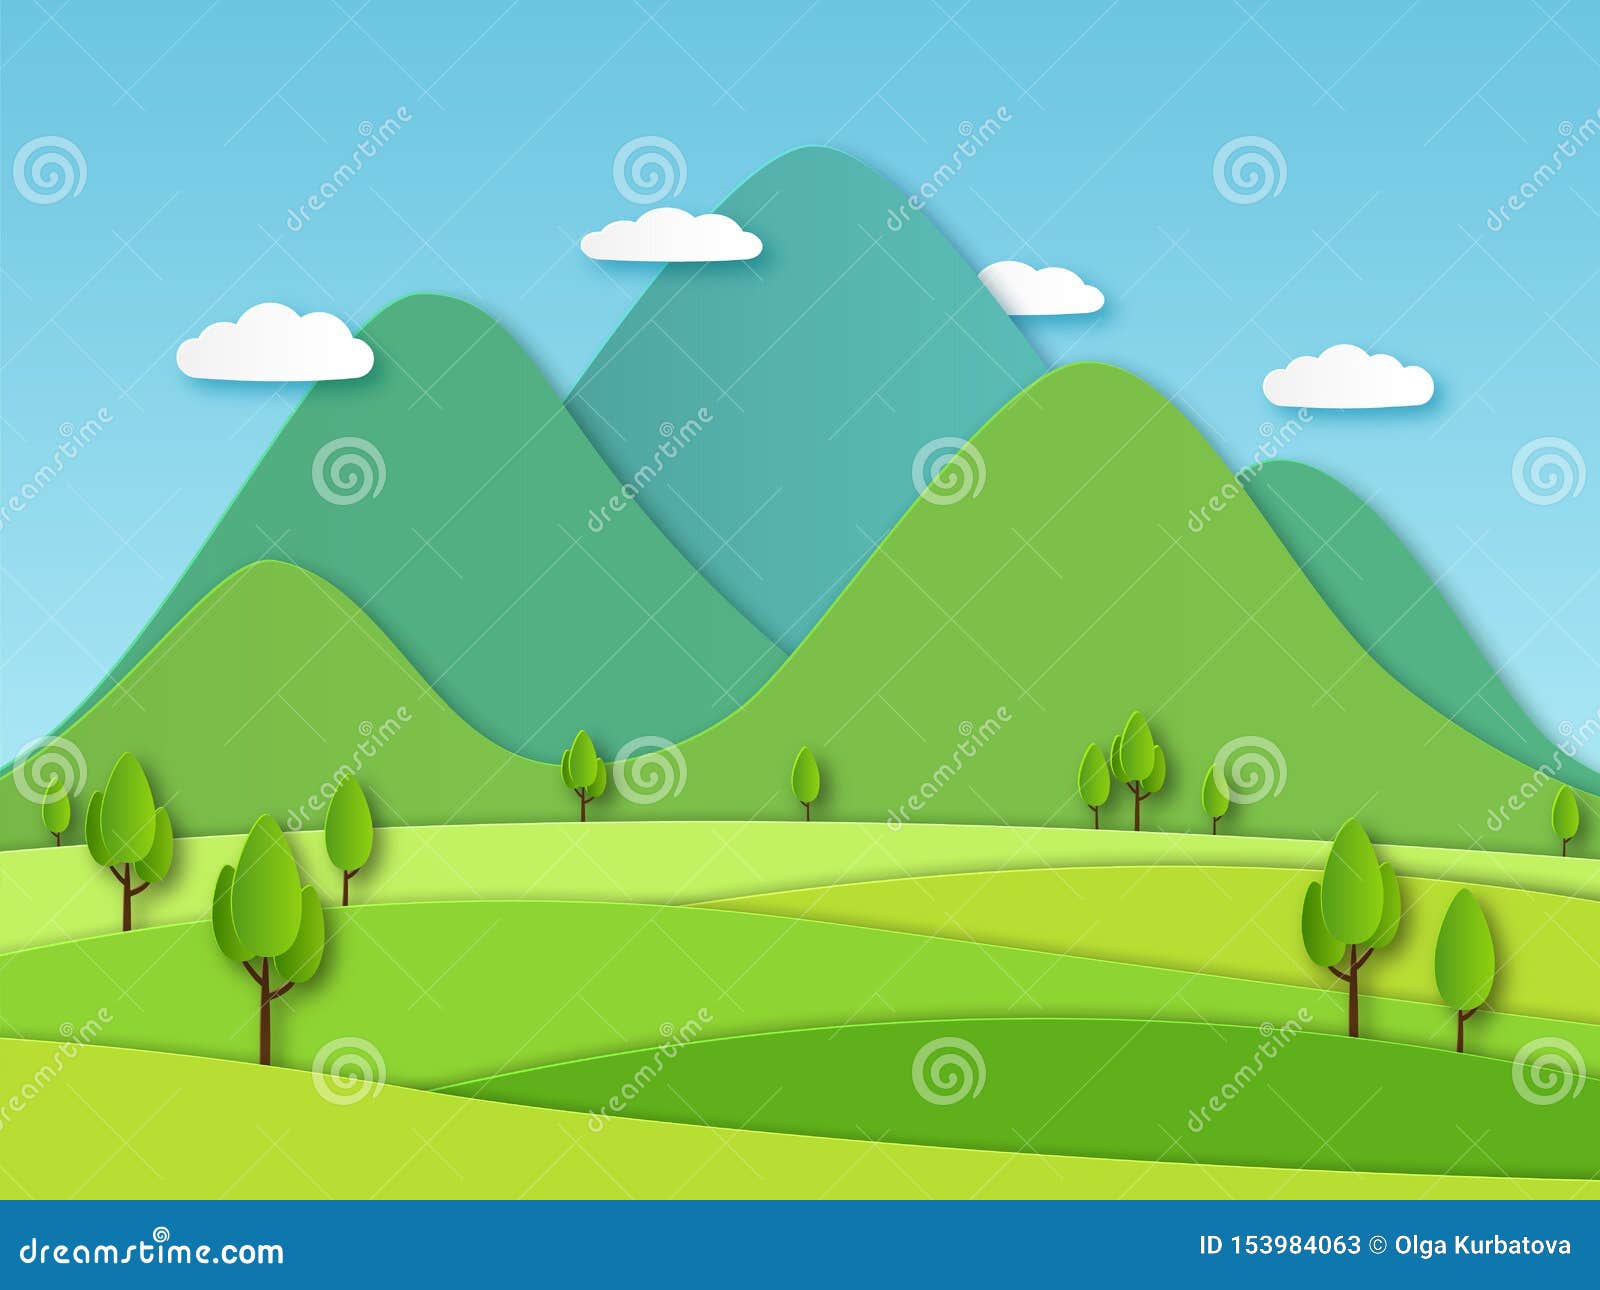 paper field landscape. summer landscape with green hills and blue sky, white clouds. layered papercut creative  3d